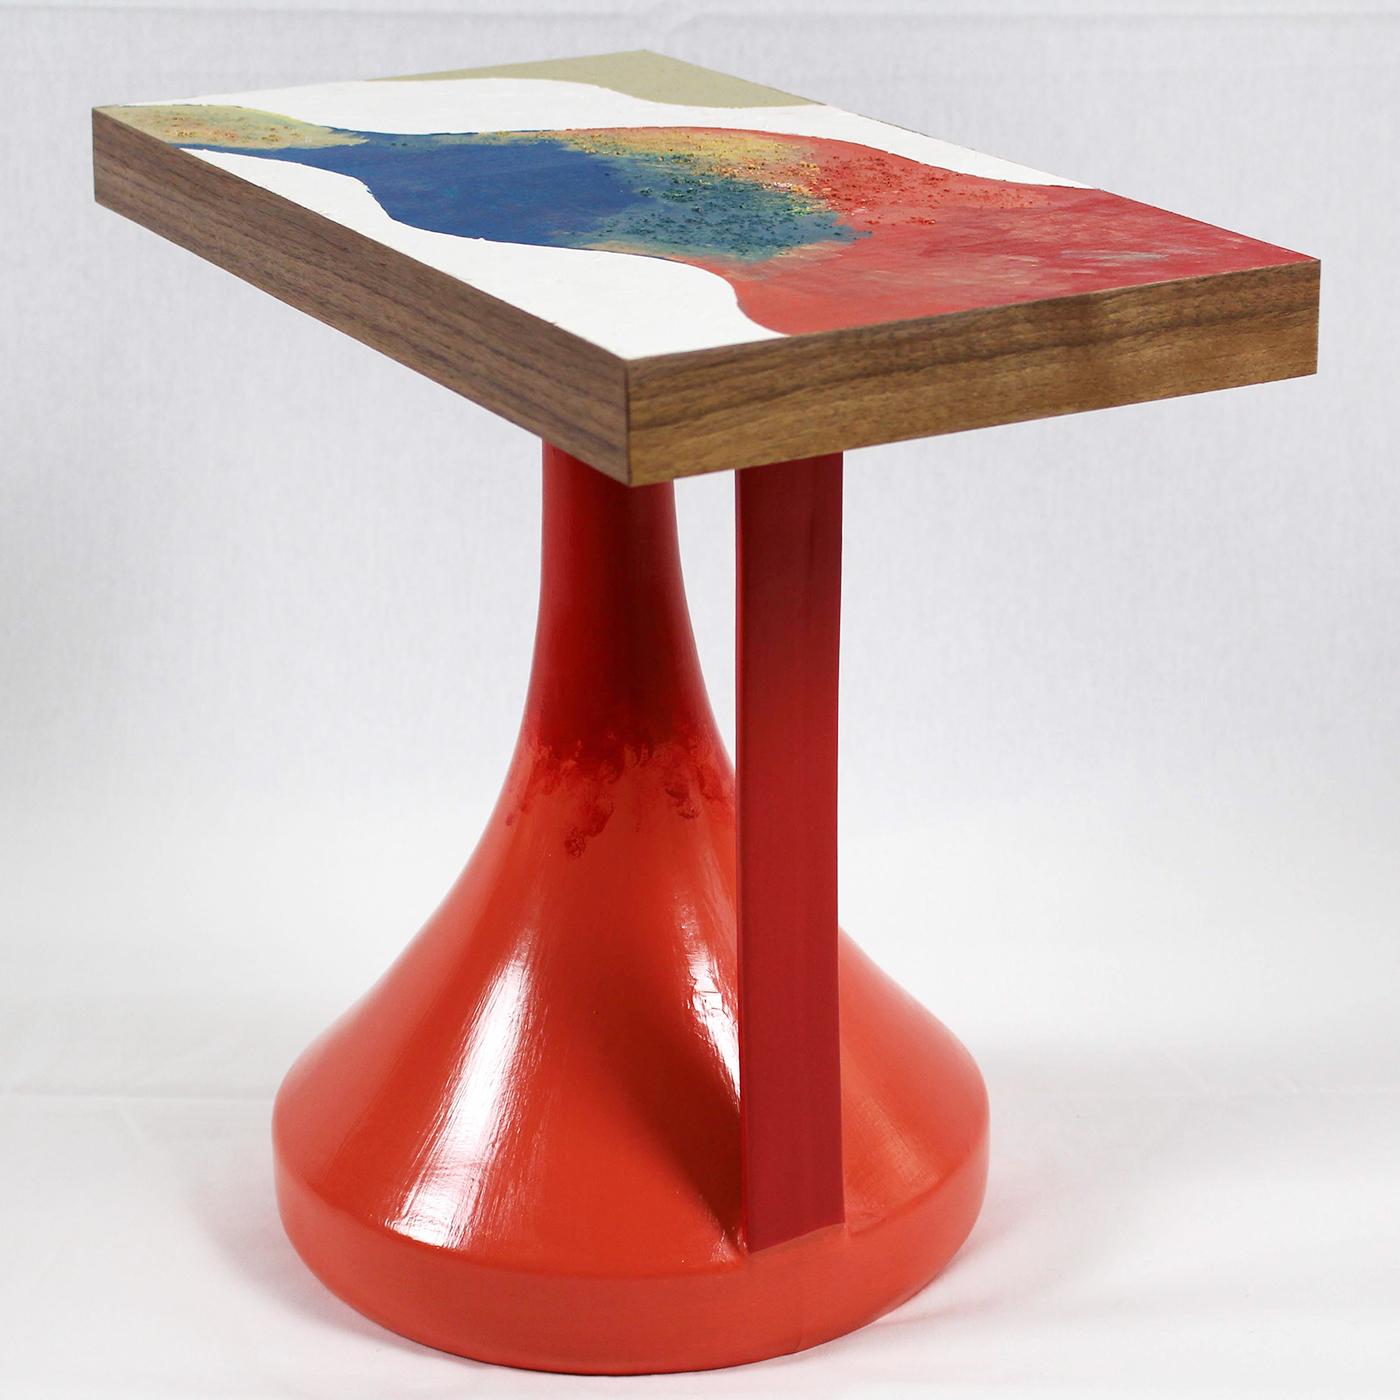 Masterful use of colors and asymmetric volumes define this outstanding coffee table, which is a non-reproducible, one-off piece from the Saturno series. The two-toned, funnel-like base - painted with mixed-media decorations - is handcrafted of white